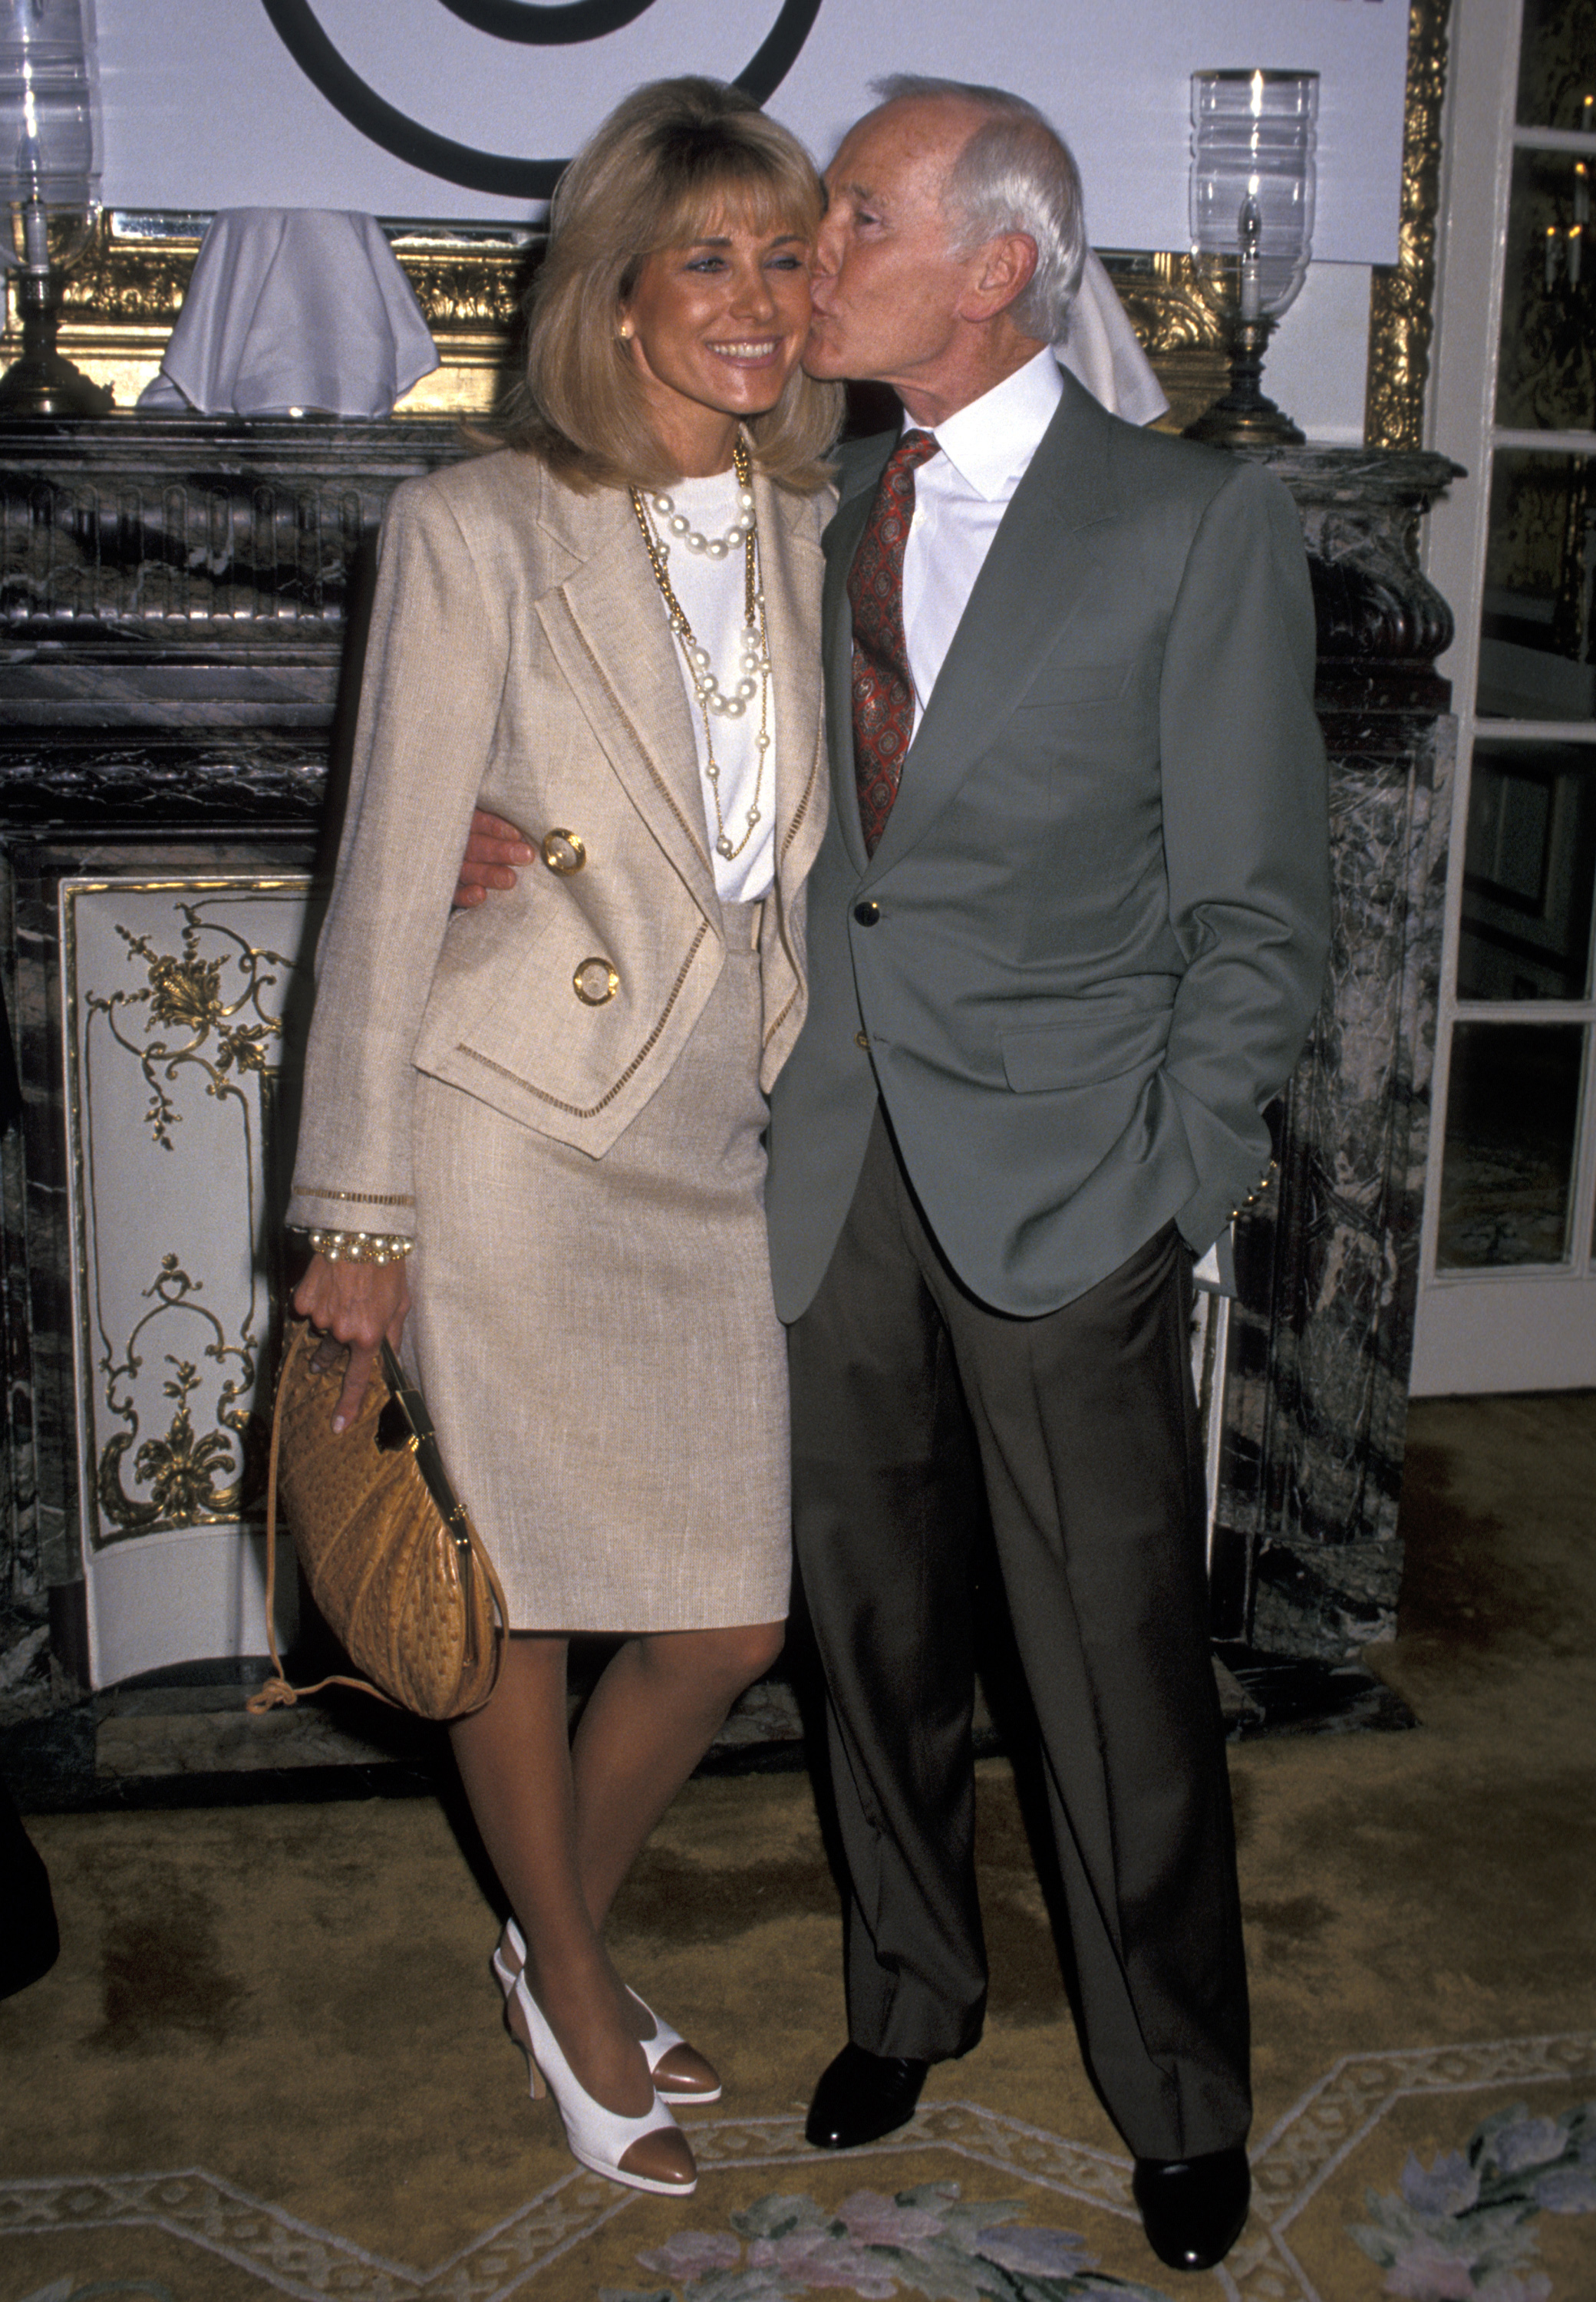 Johnny Carson and Alexis Maas during the 1993 Center for Communication Awards Luncheon Honoring Johnny Carson at The Plaza Hotel in New York City | Source: Getty Images